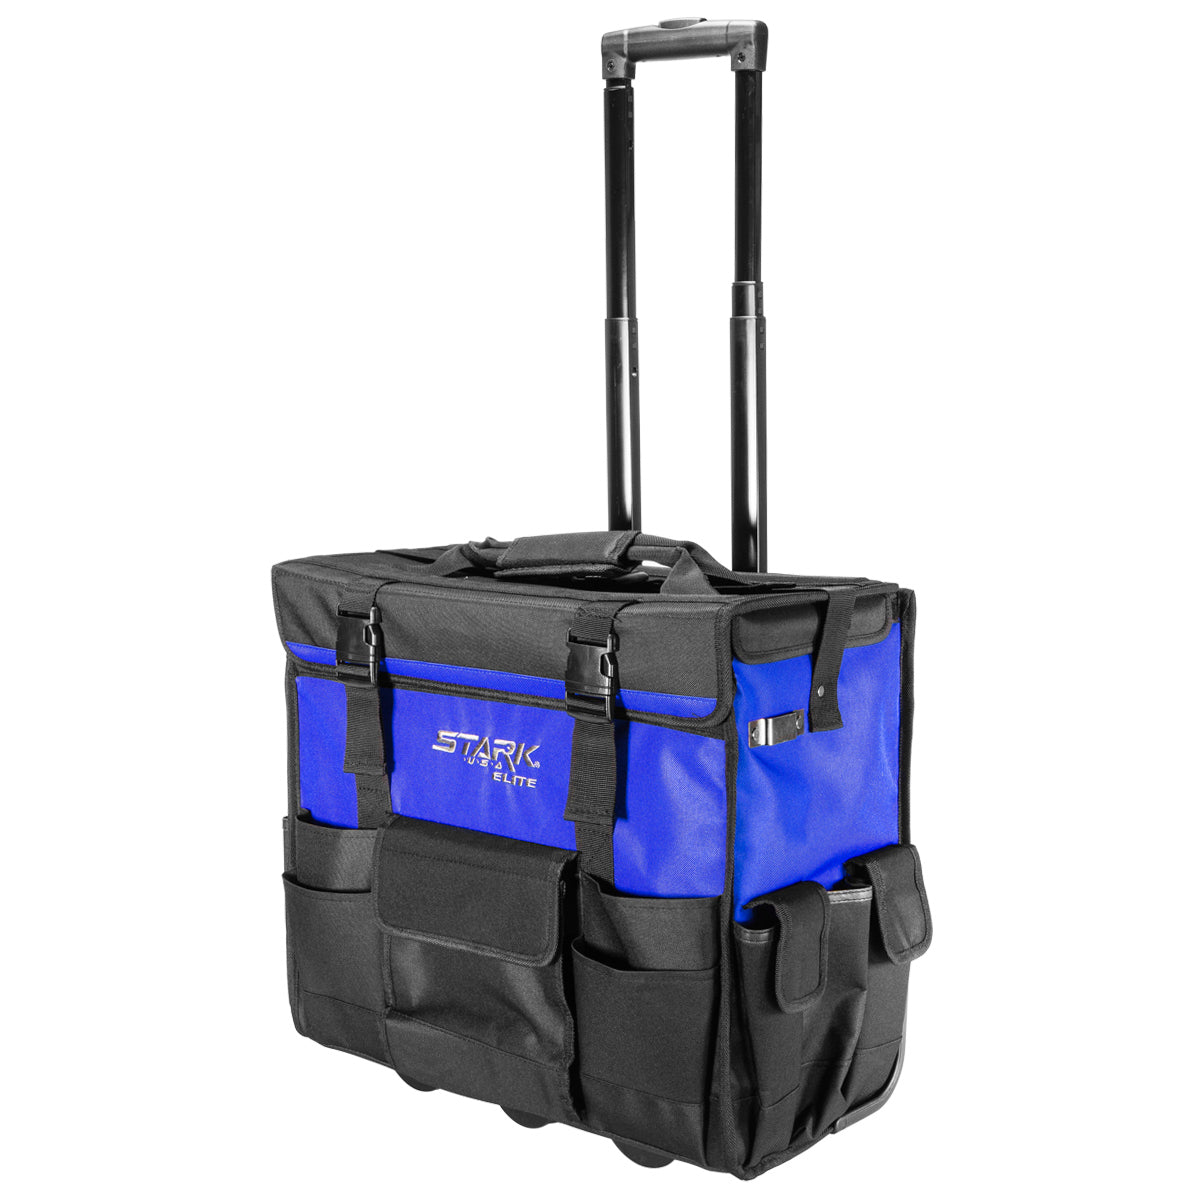 Portable Tool Boxes  With Drawers & Wheels, Carrying Cases, Totes